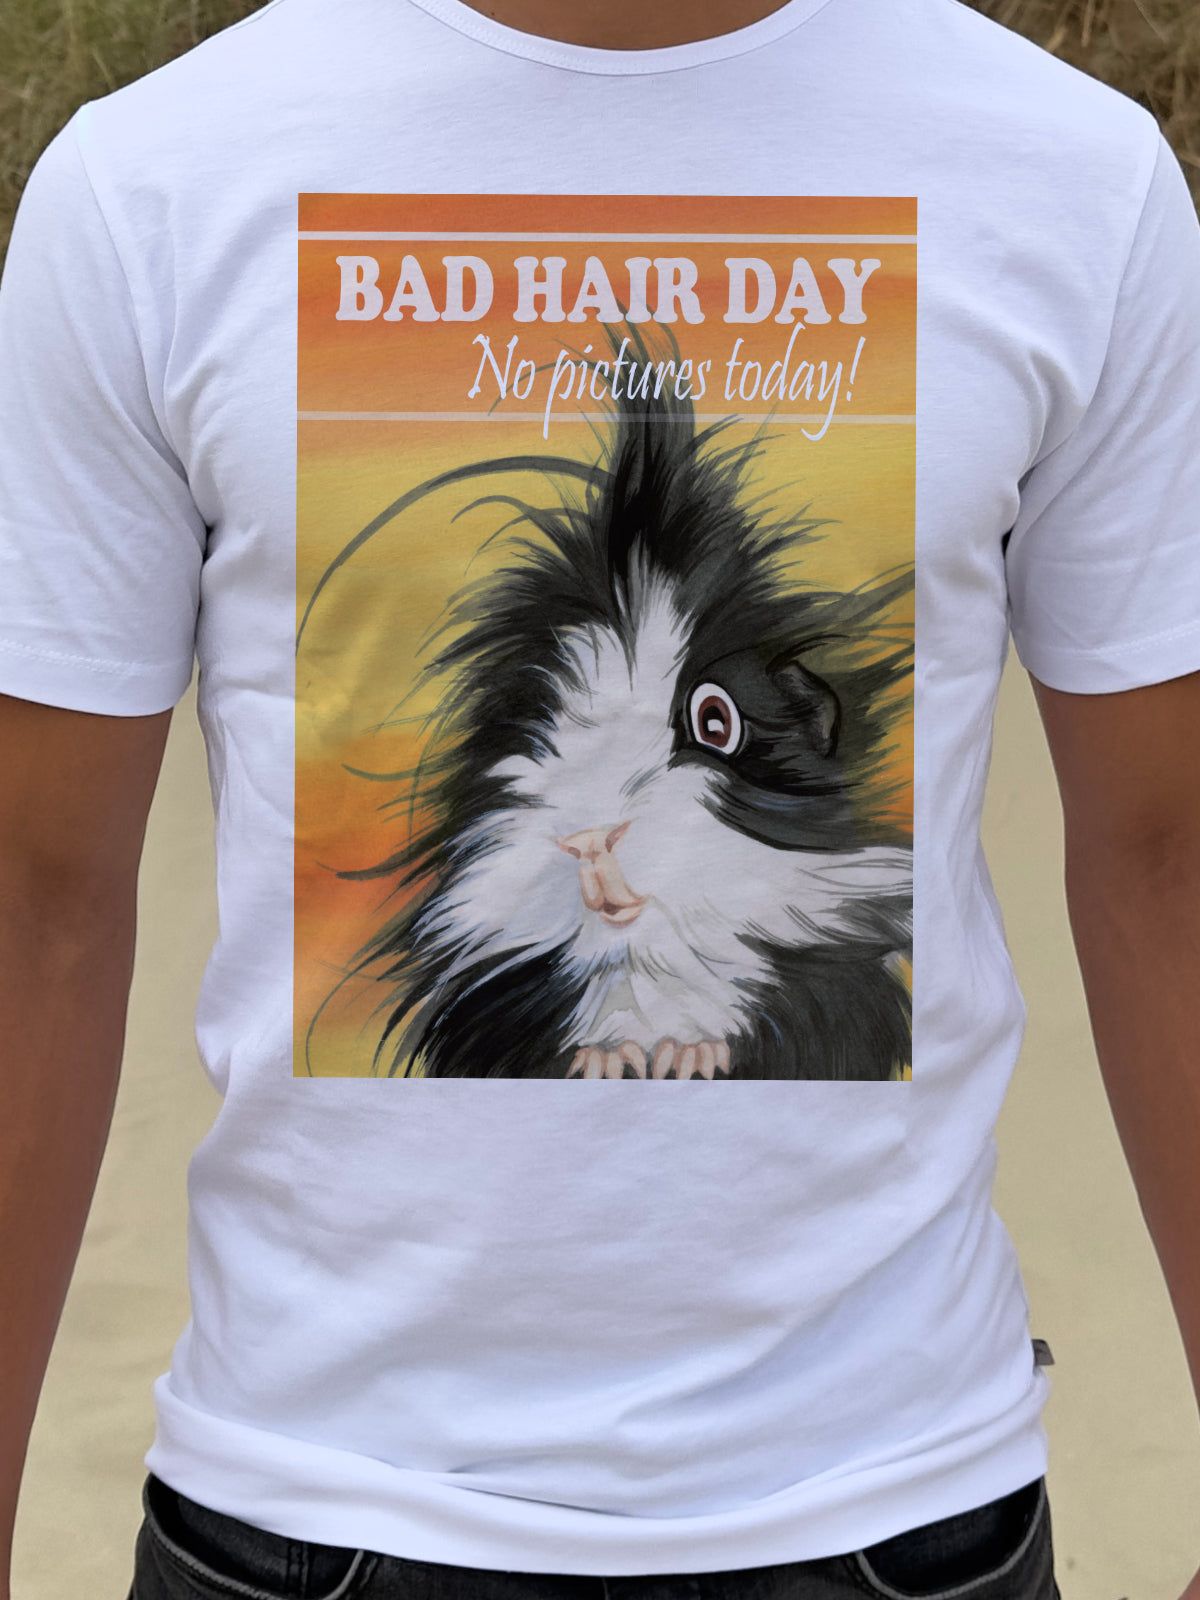 T-shirt "Bad Hair Day - No pictures today!"